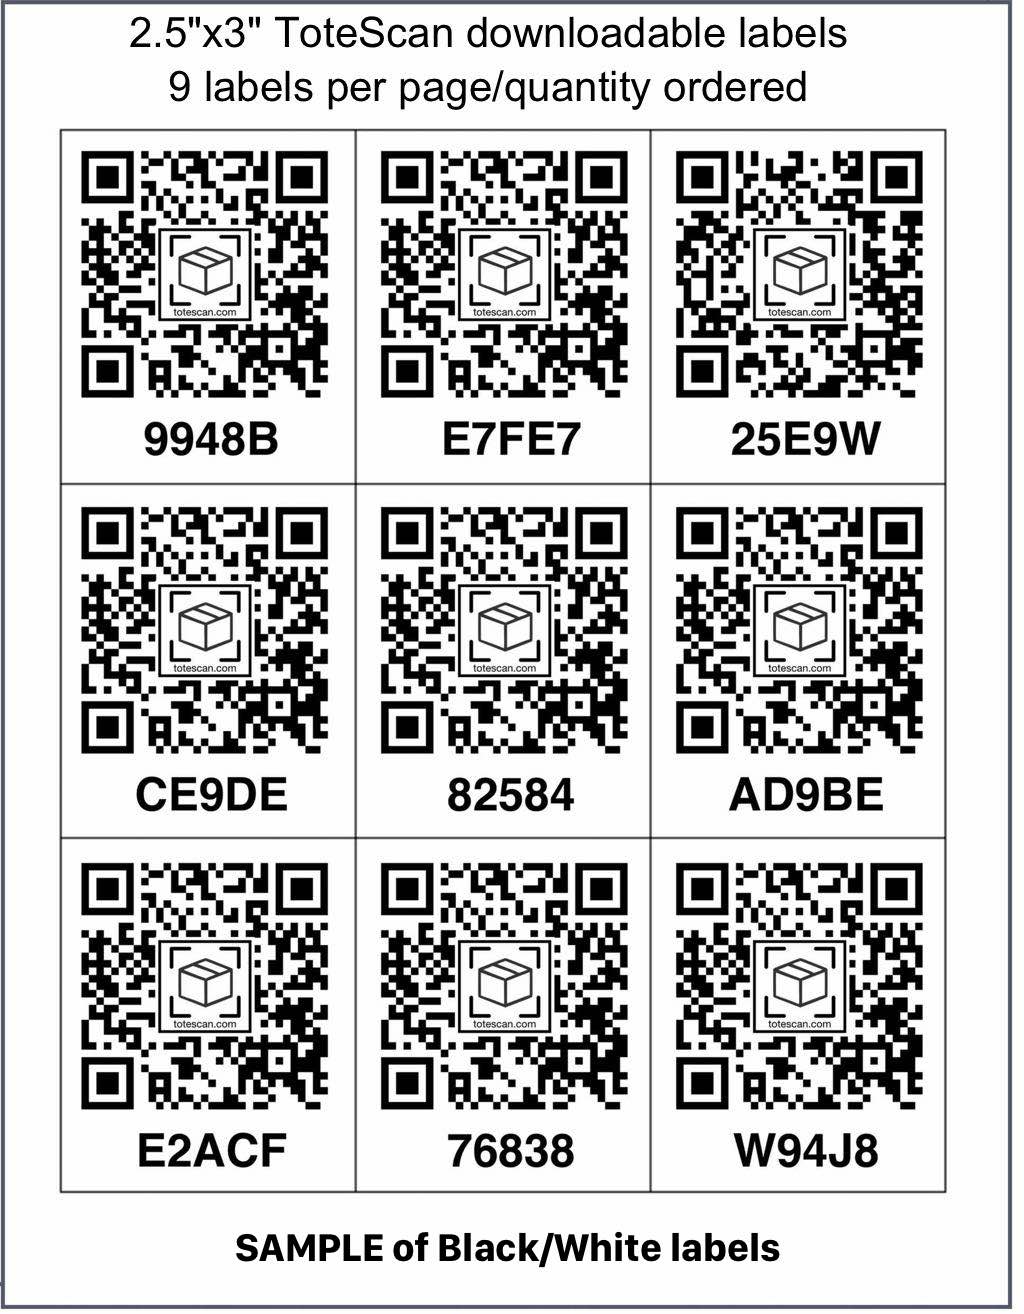 Downloadable ToteScan® labels - Large (2.5